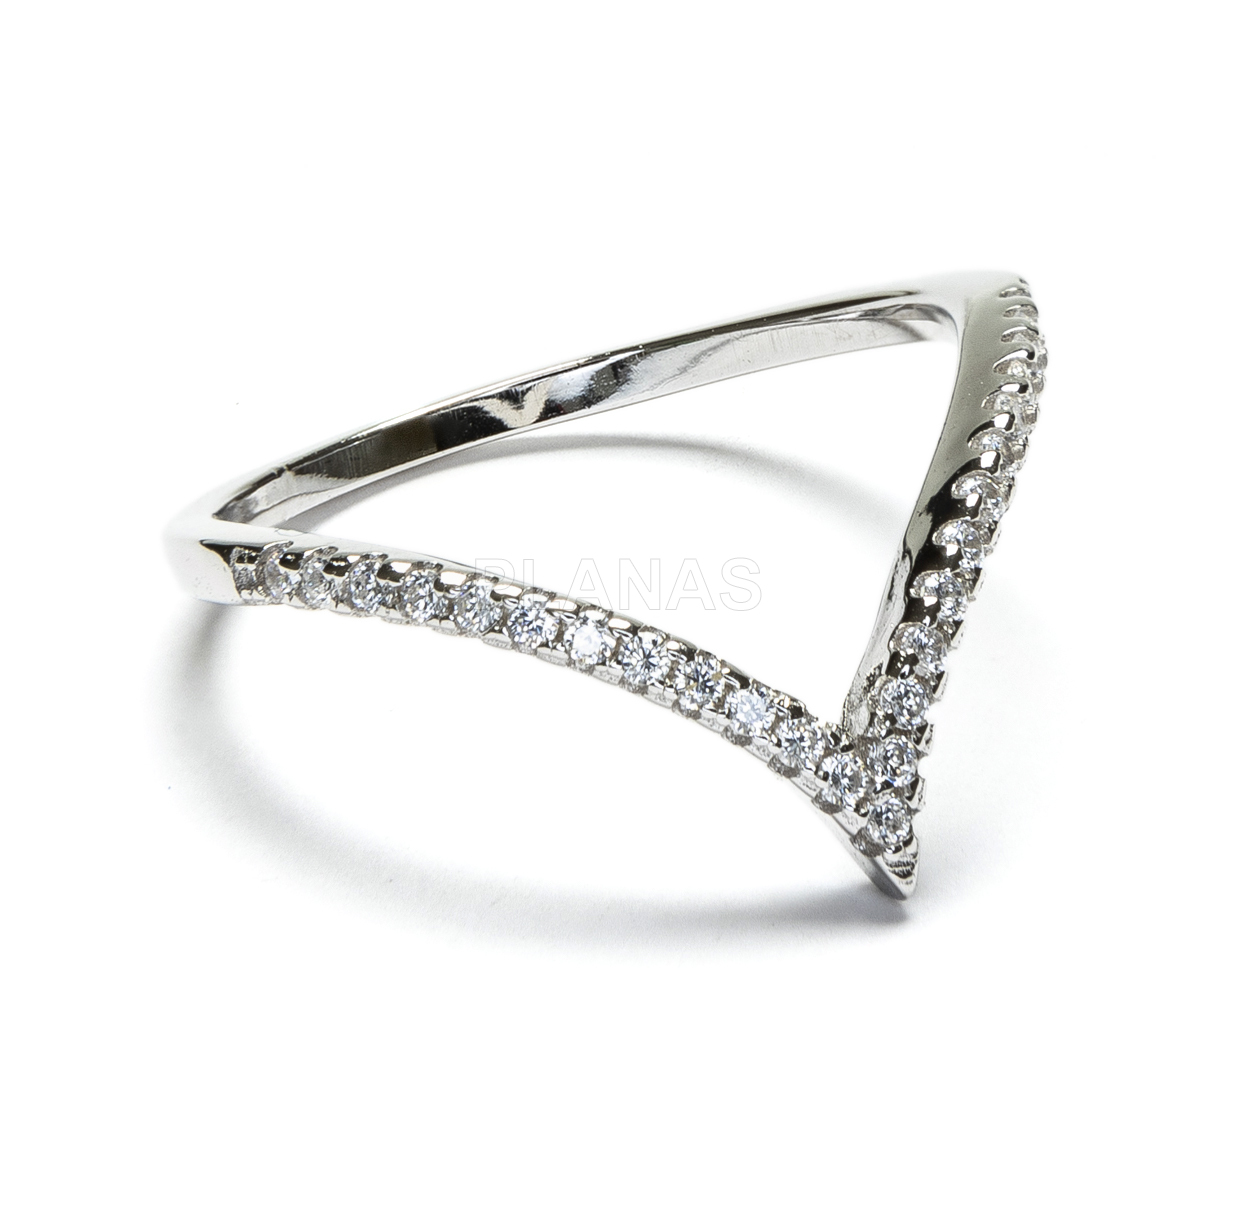 Ring in rhodium-plated sterling silver and zircons.